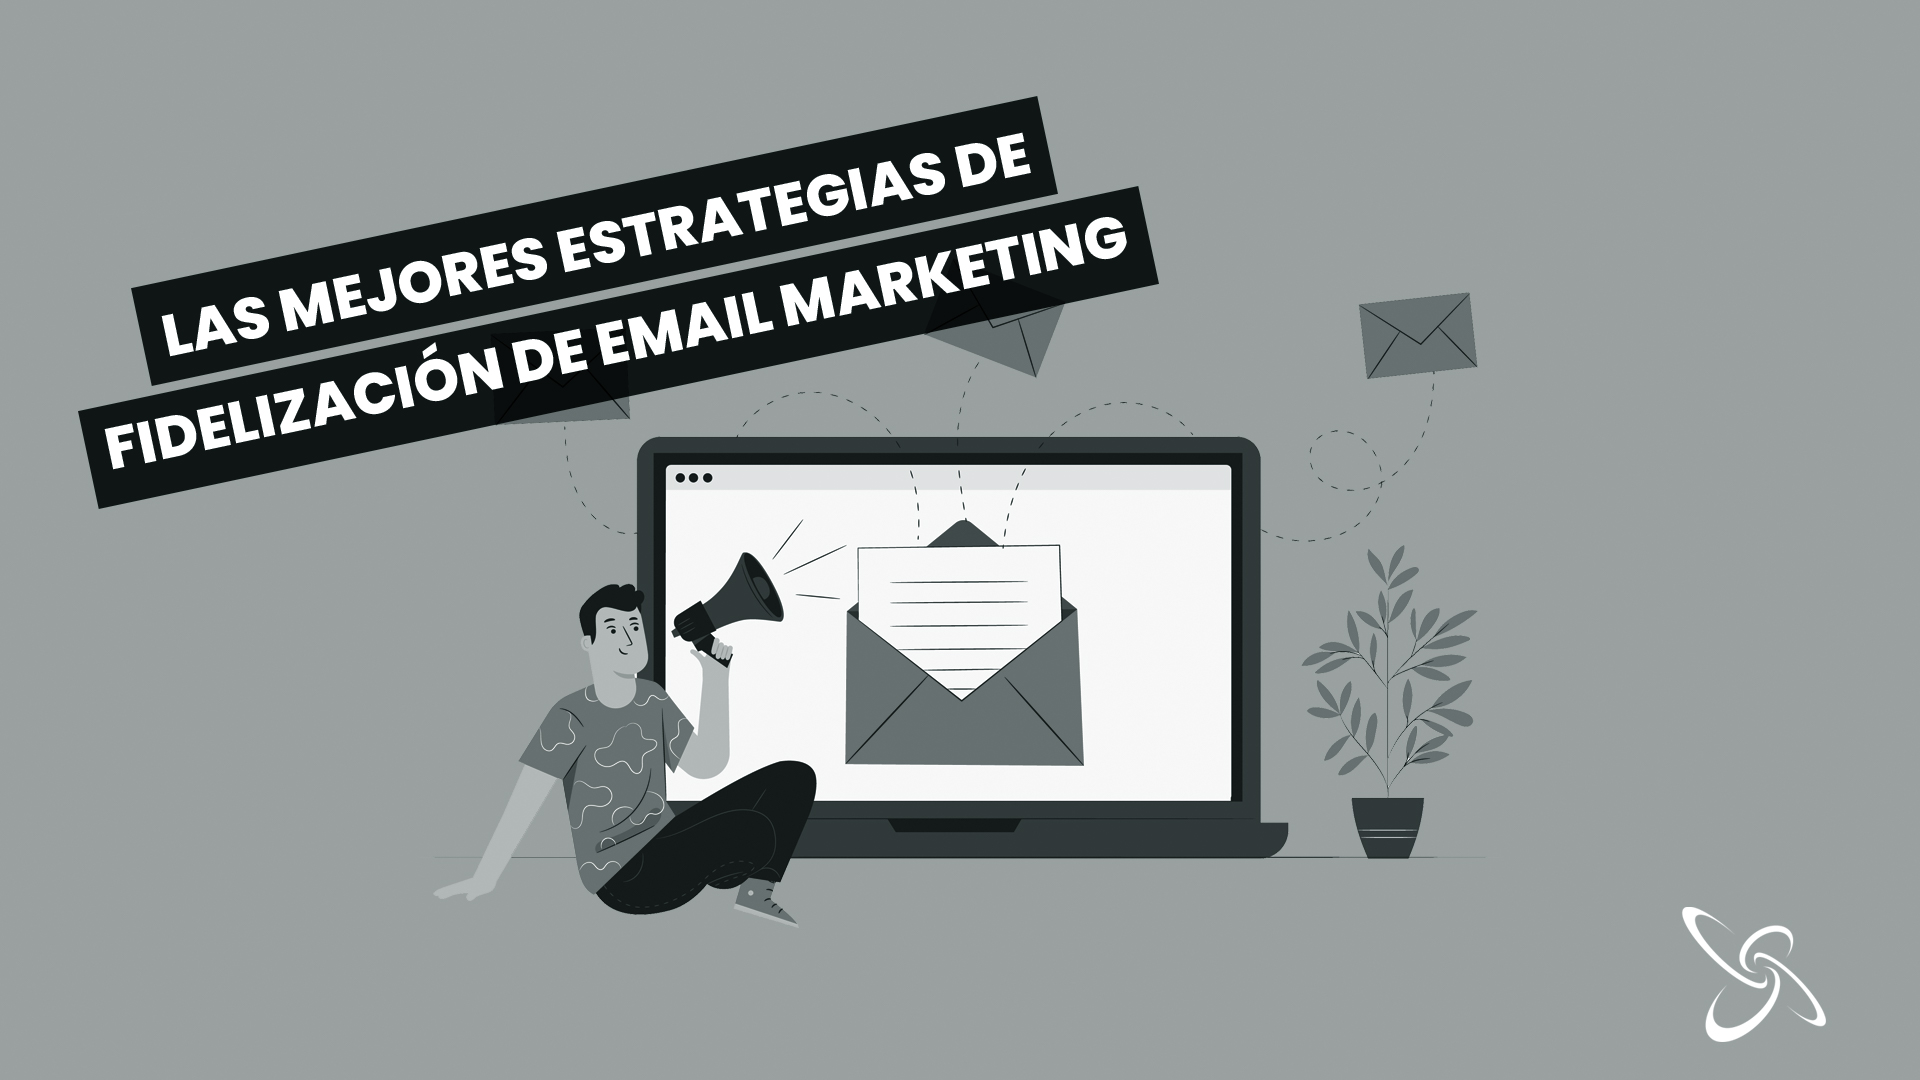 The best loyalty strategies in email marketing